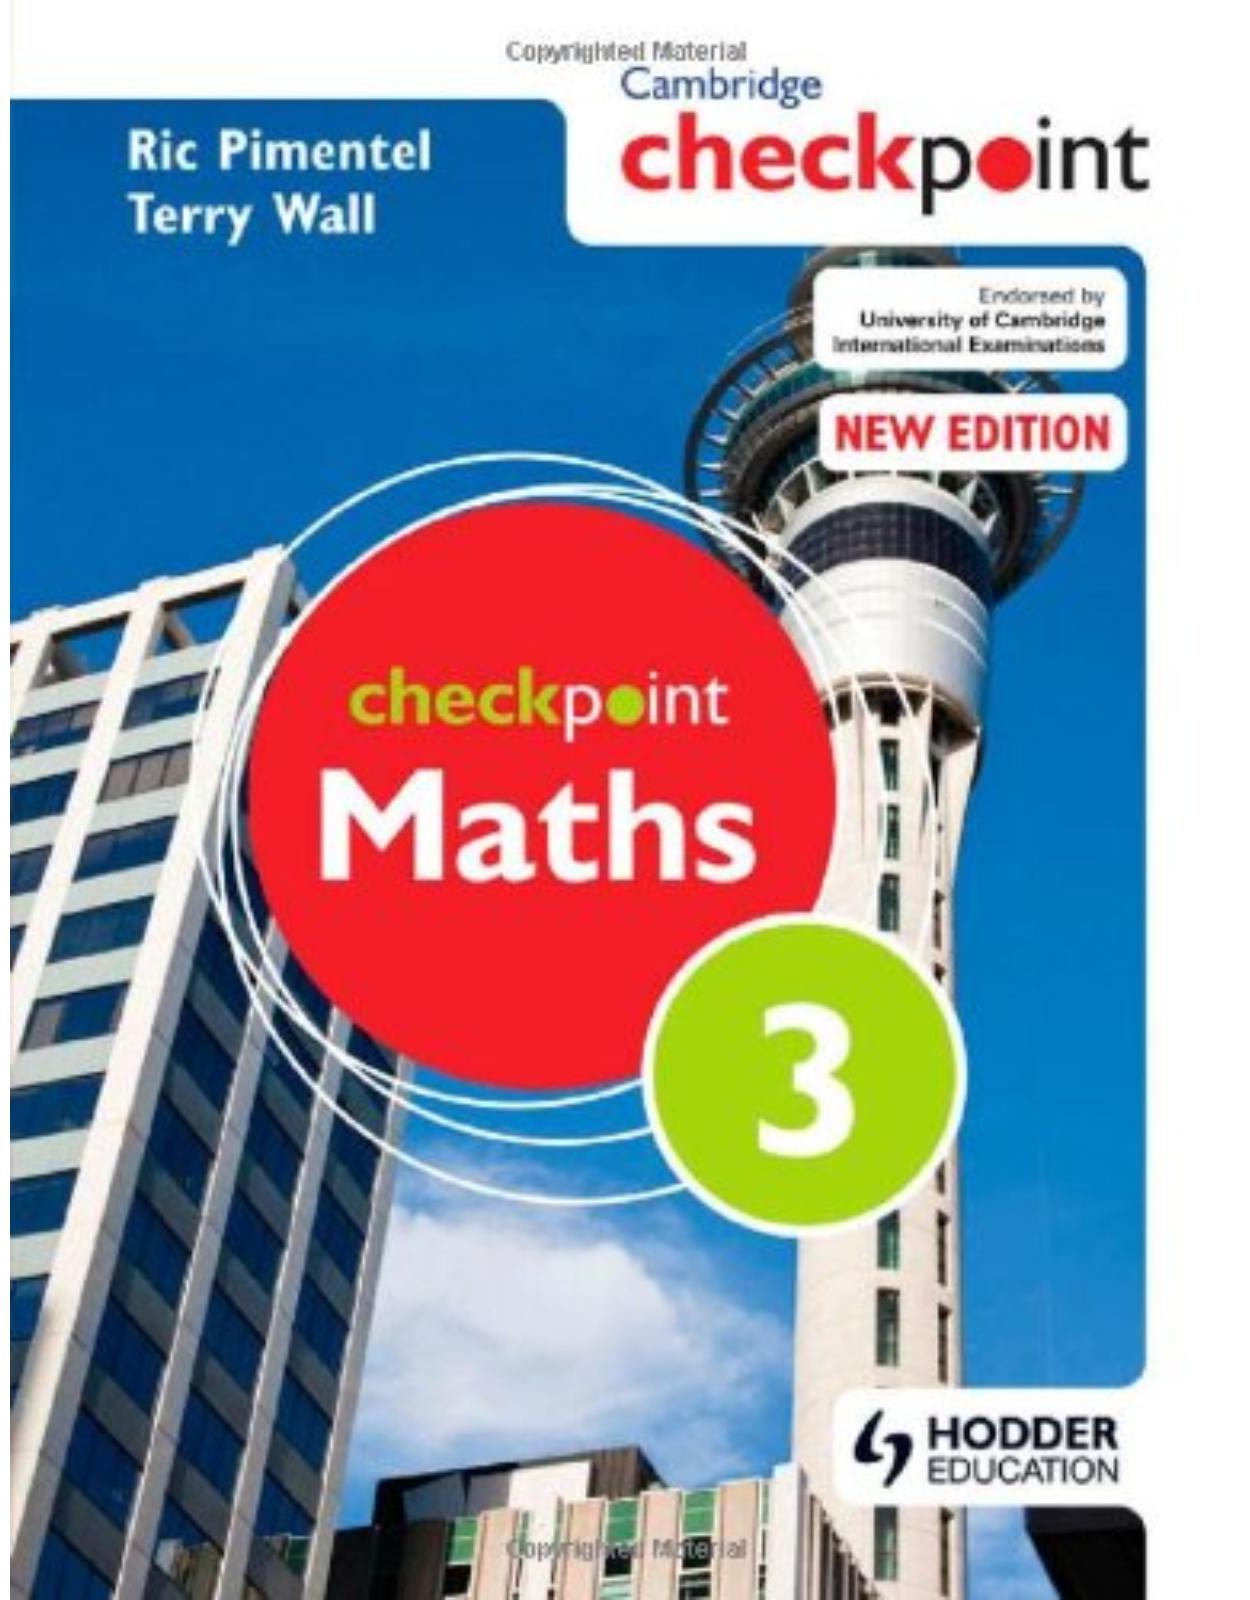 Cambridge Checkpoint Maths Student’s Book 3